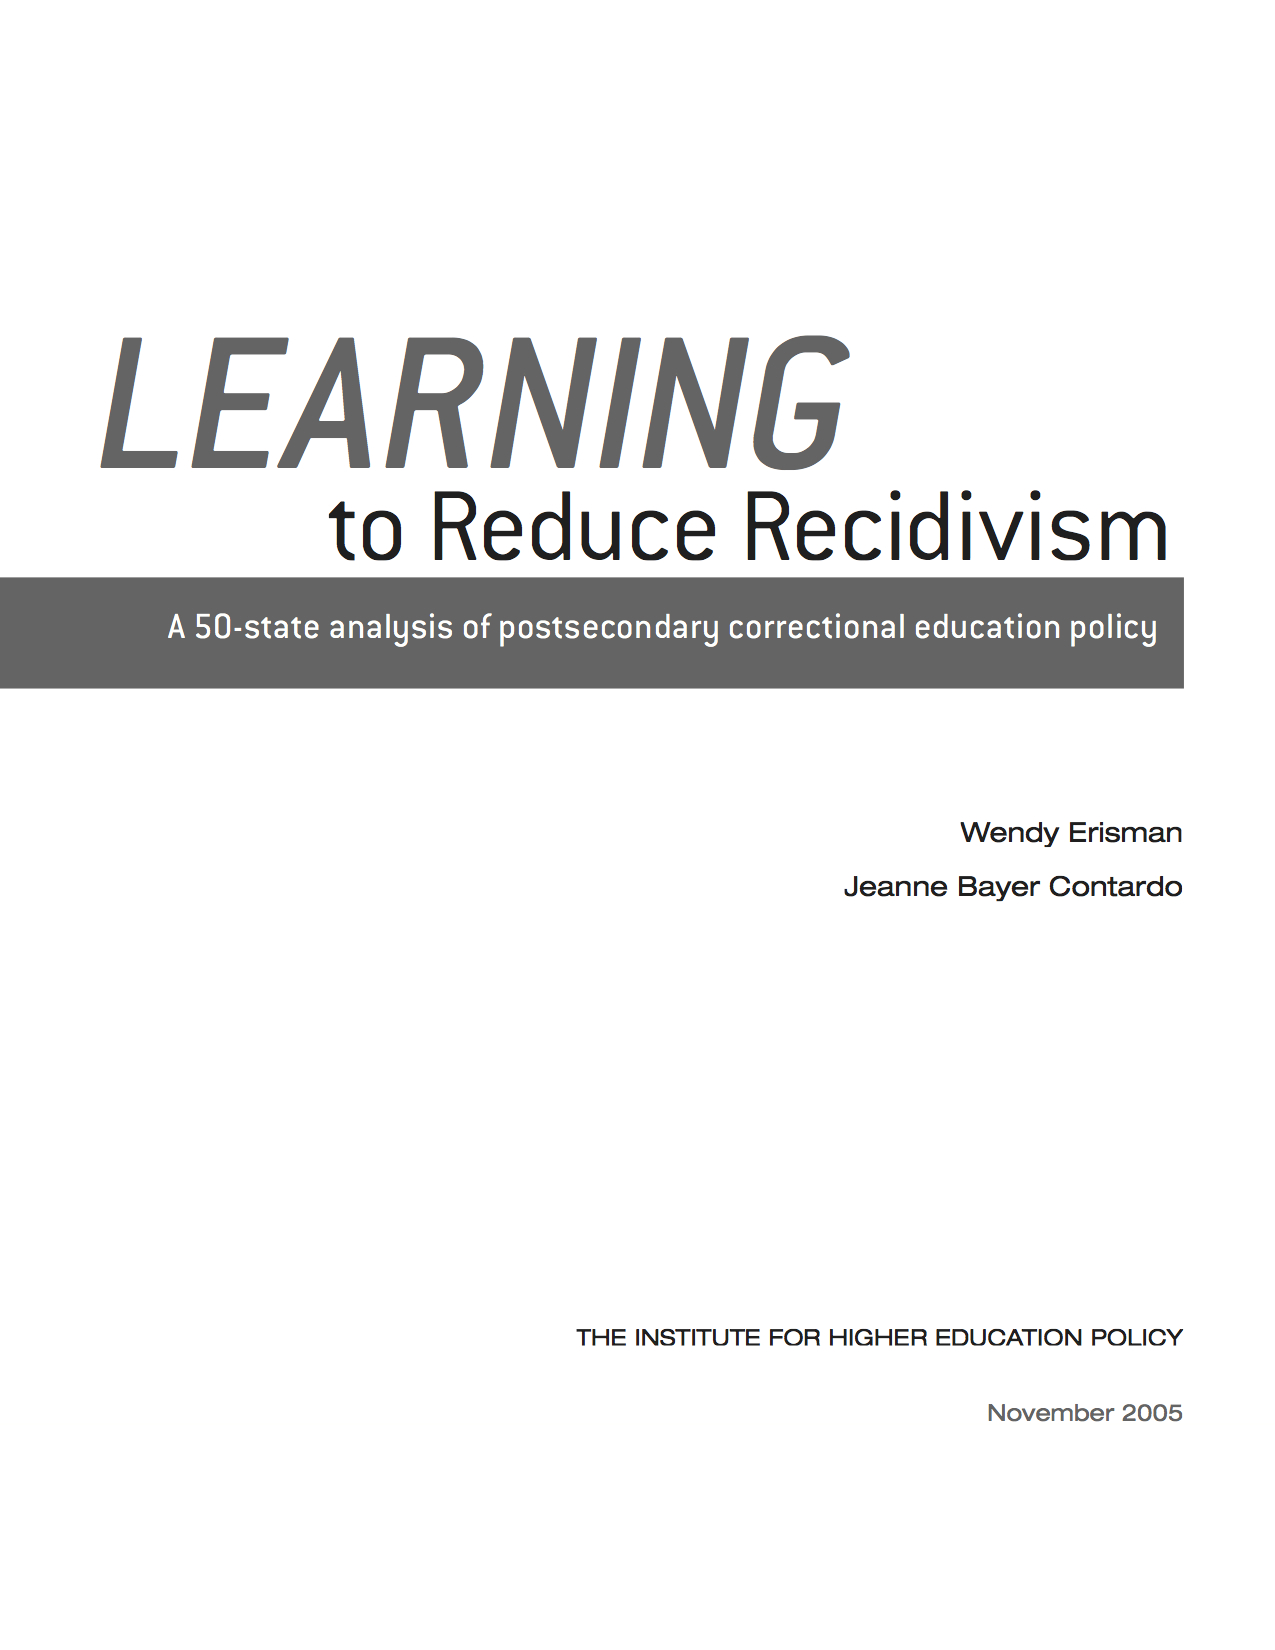 Learning to Reduce Recidivism: A 50-State Analysis of Postsecondary Correctional Education Policy